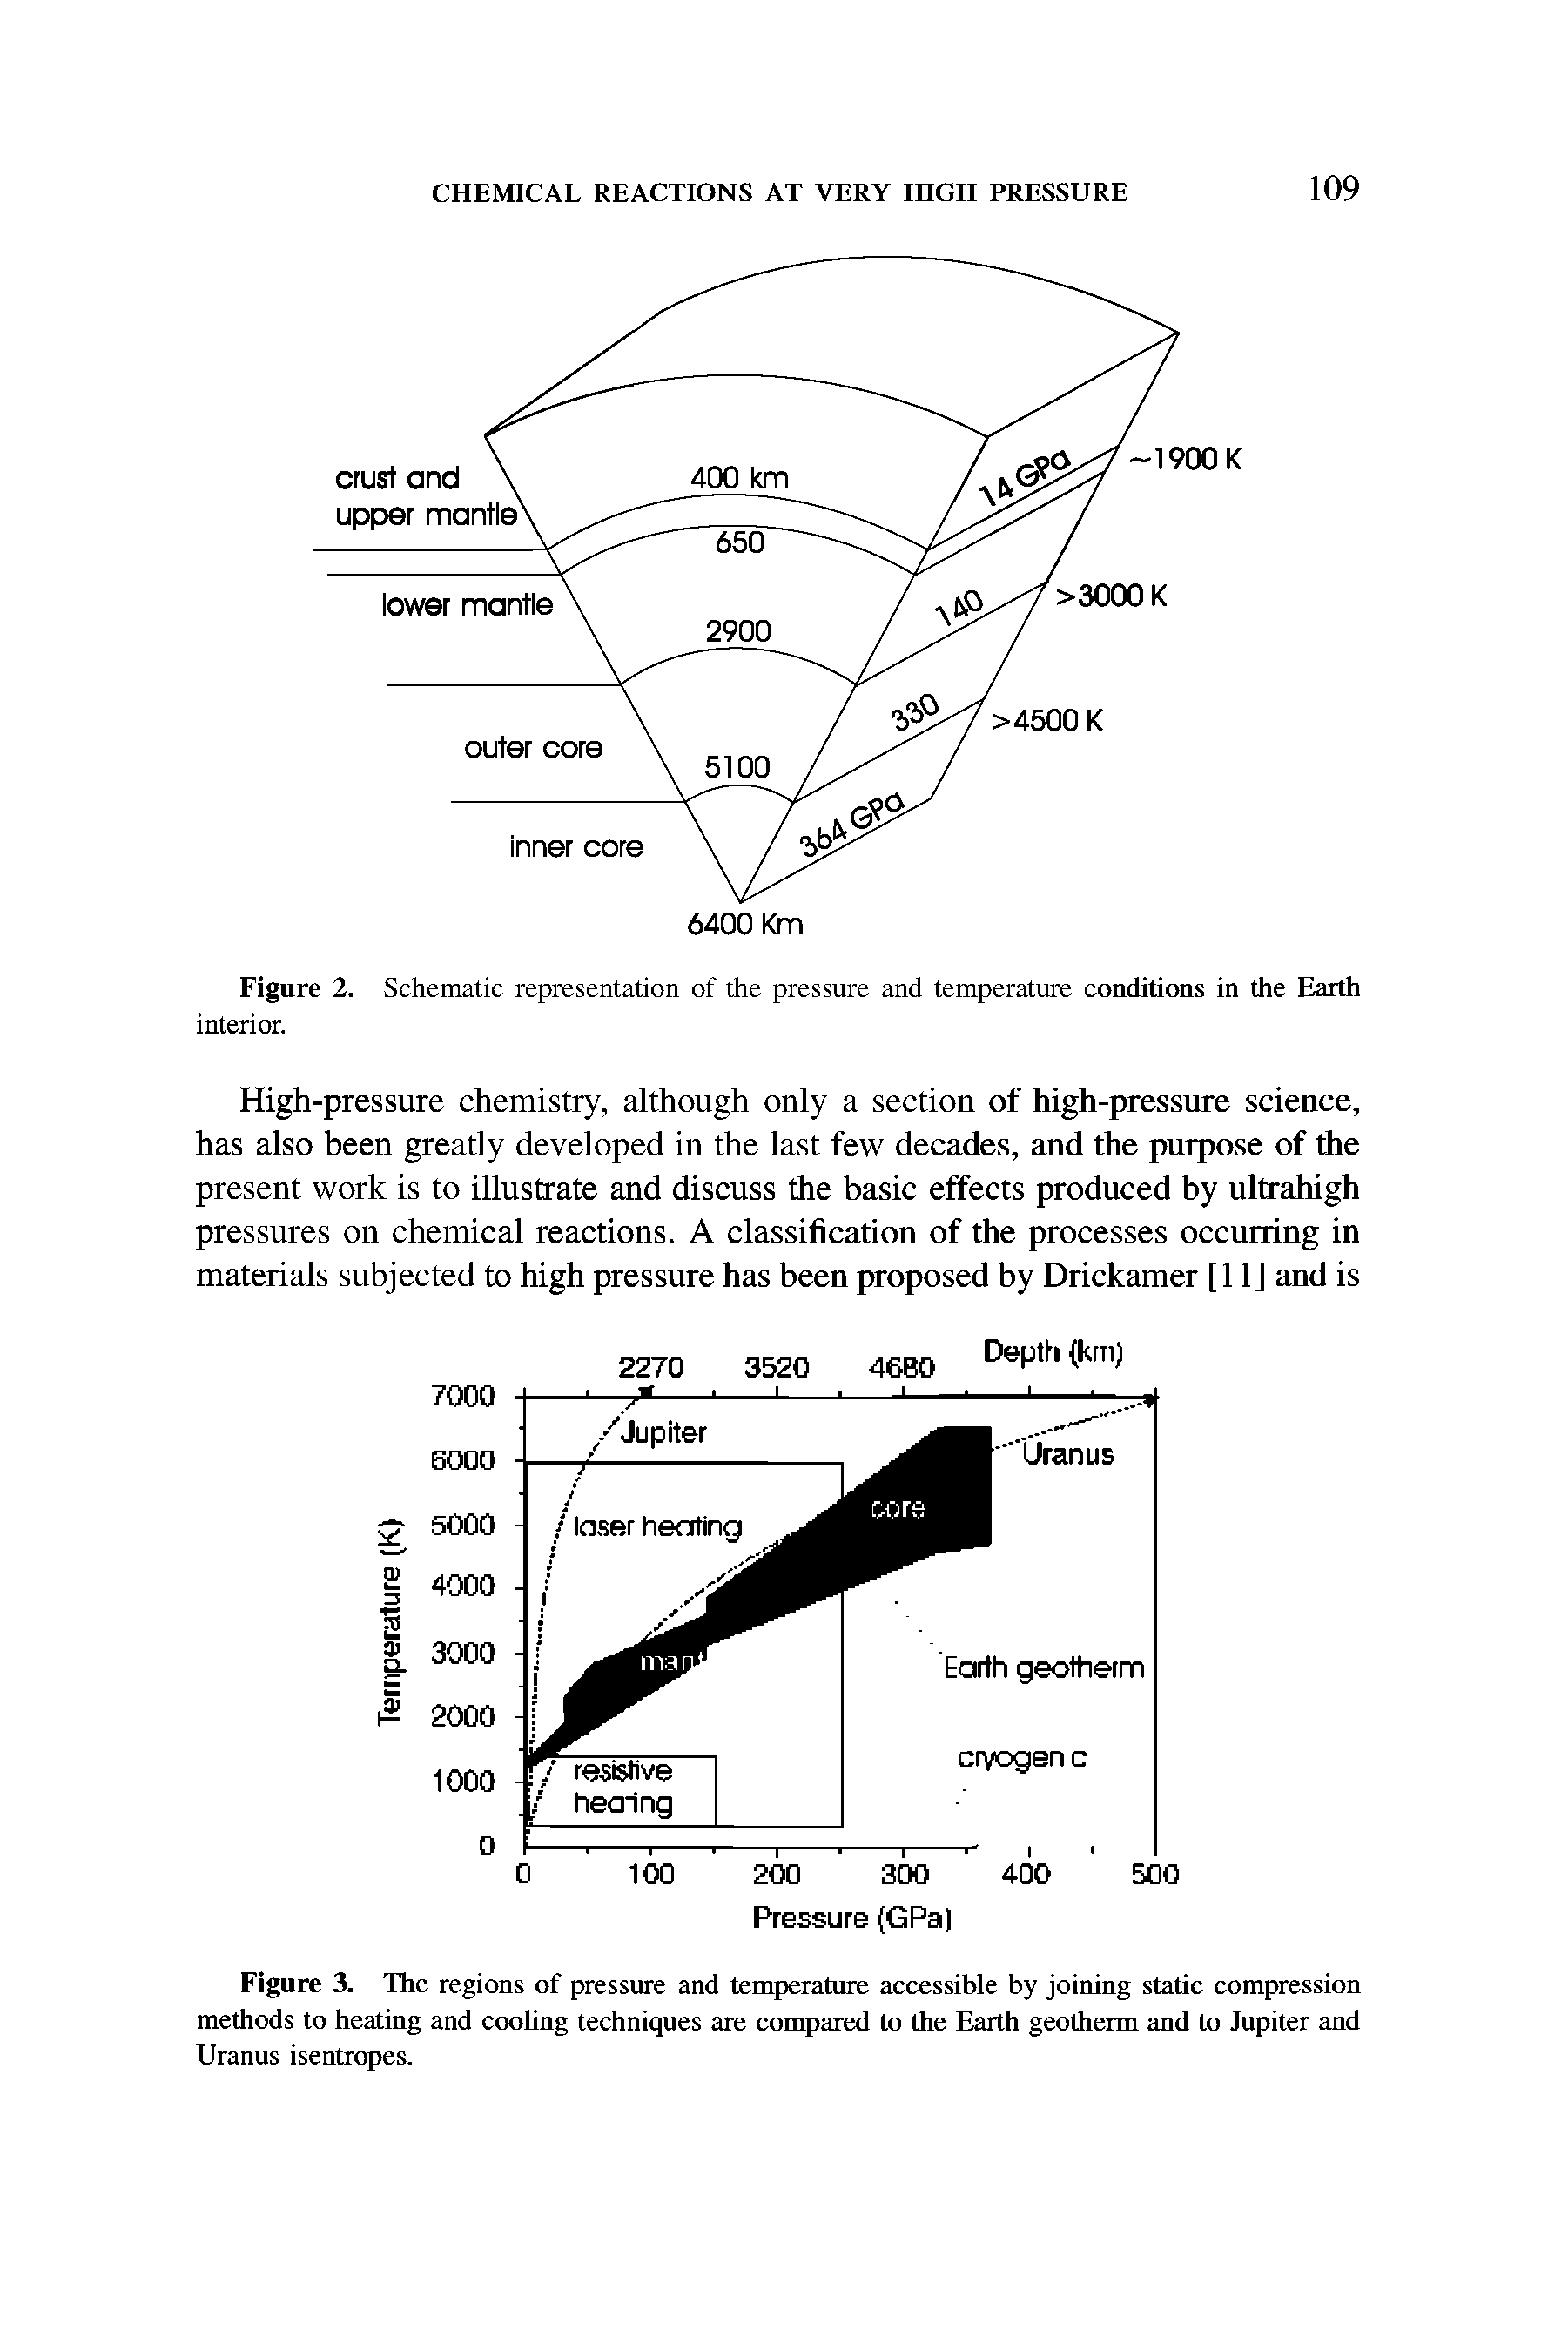 Figure 3. The regions of pressure and temperature accessible by joining static compression methods to heating and cooling techniques are compared to the Earth geotherm and to Jupiter and Uranus isentropes.